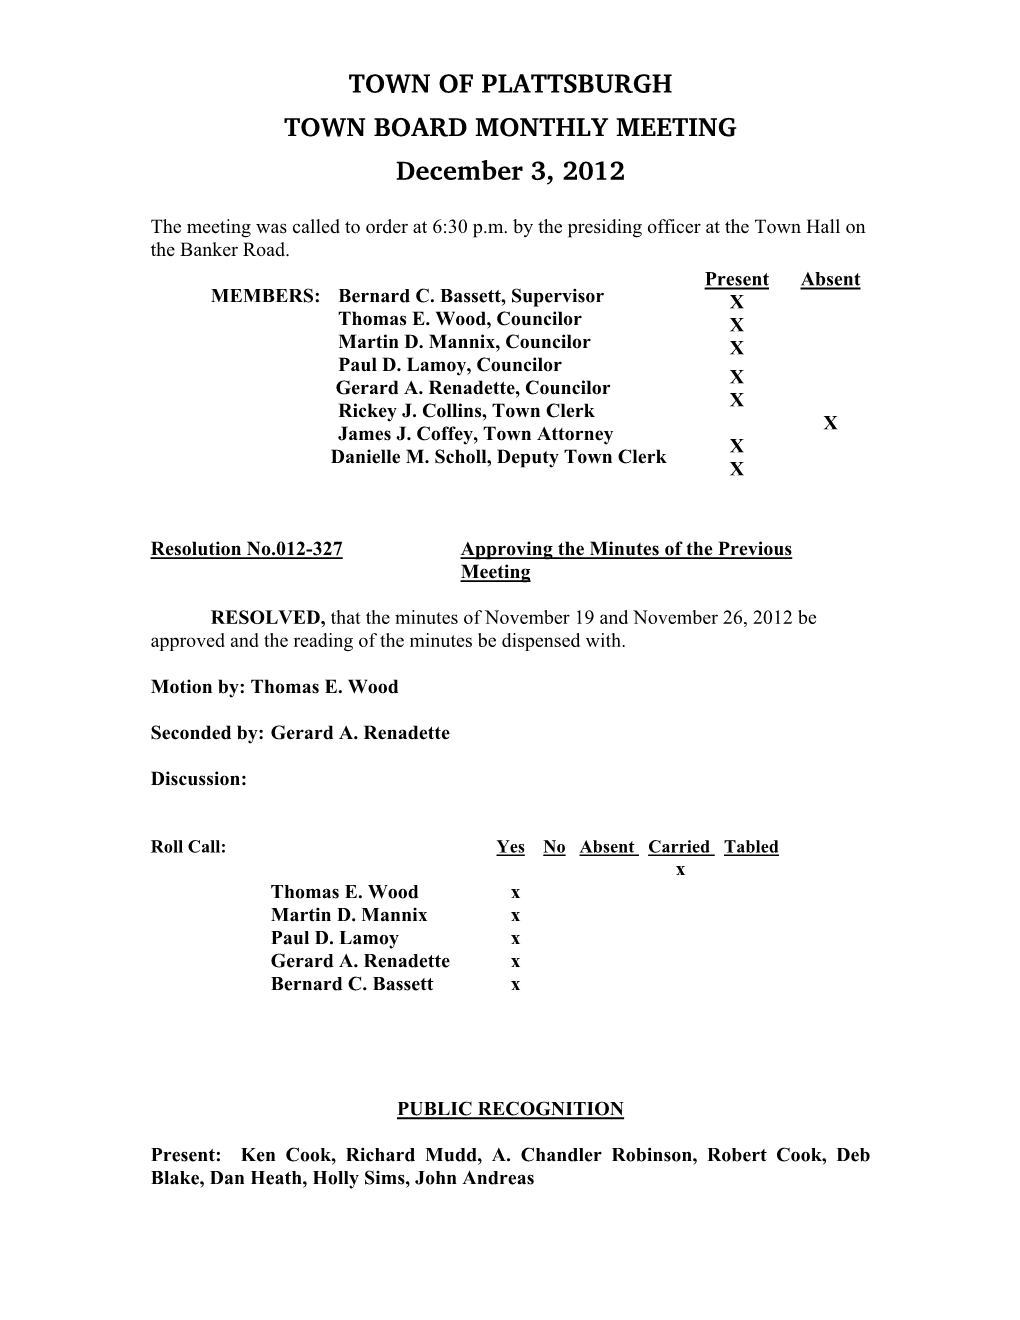 TOWN of PLATTSBURGH TOWN BOARD MONTHLY MEETING December 3, 2012